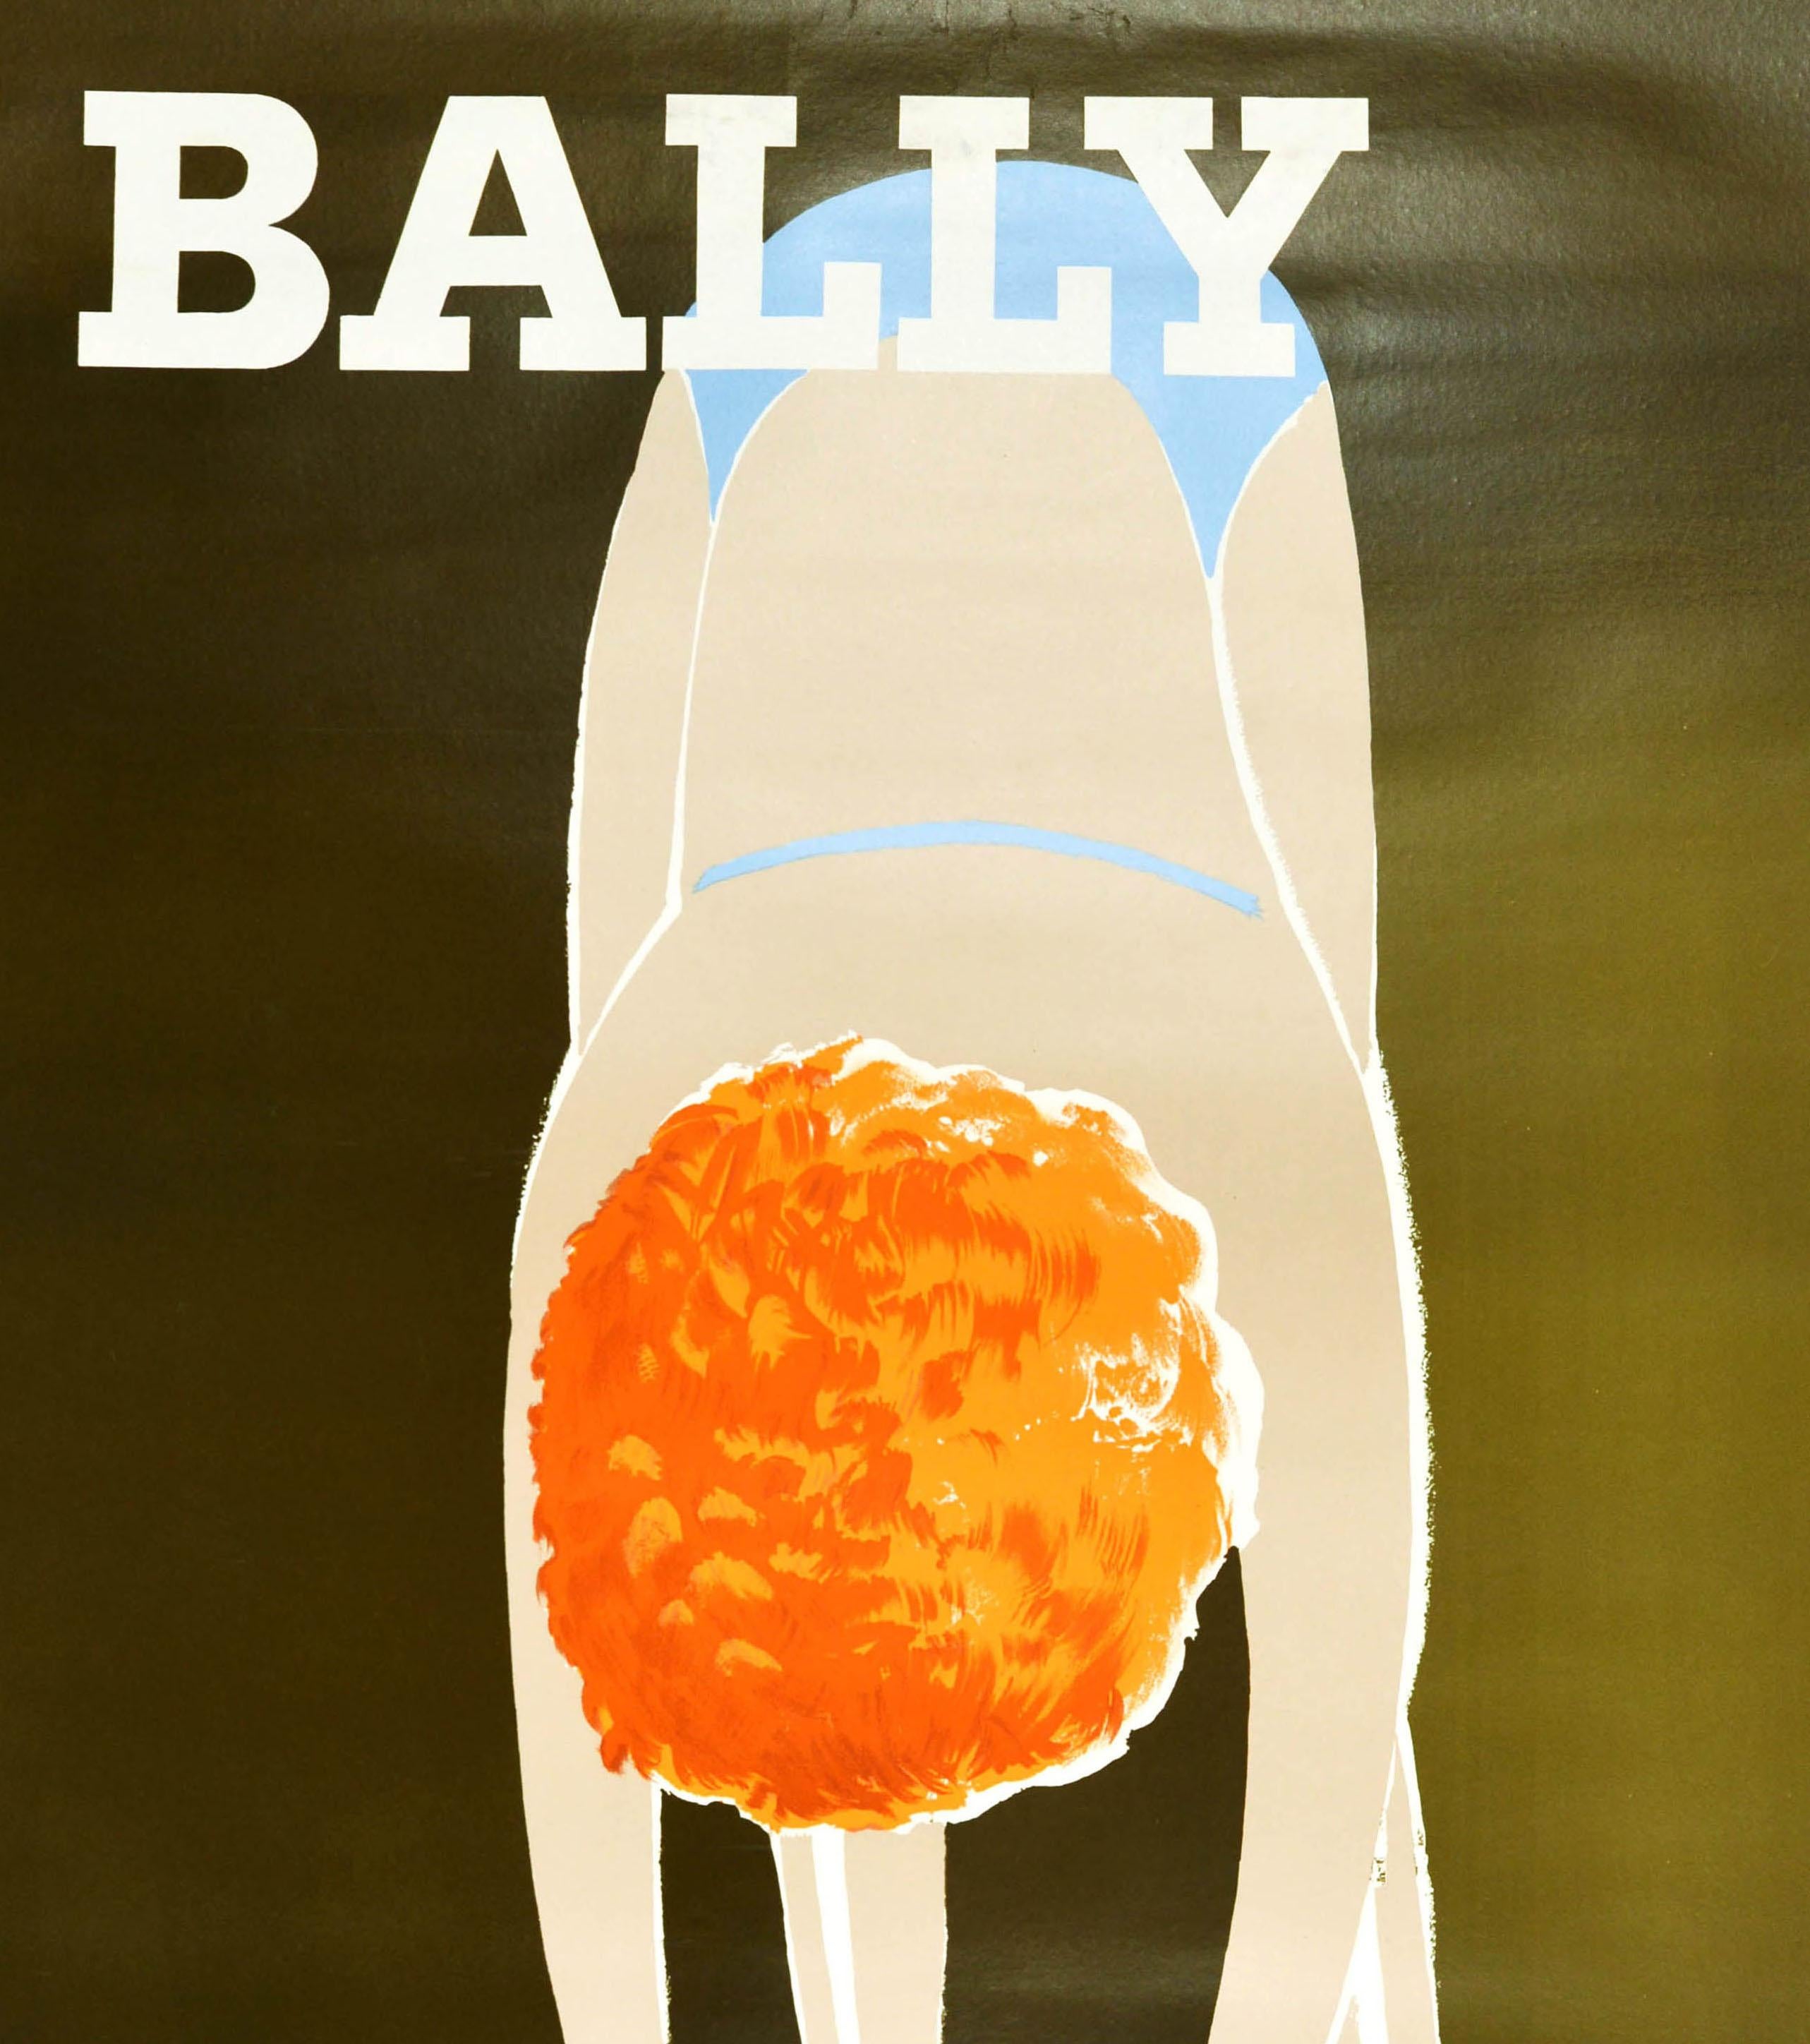 Original vintage advertising poster for Bally Shoes featuring a great image by Fix Masseau (Pierre Felix Masseau; 1905-1994) of a lady leaning over, putting on her shiny new red shoes. Large size. Good condition, minor staining, minor creasing,